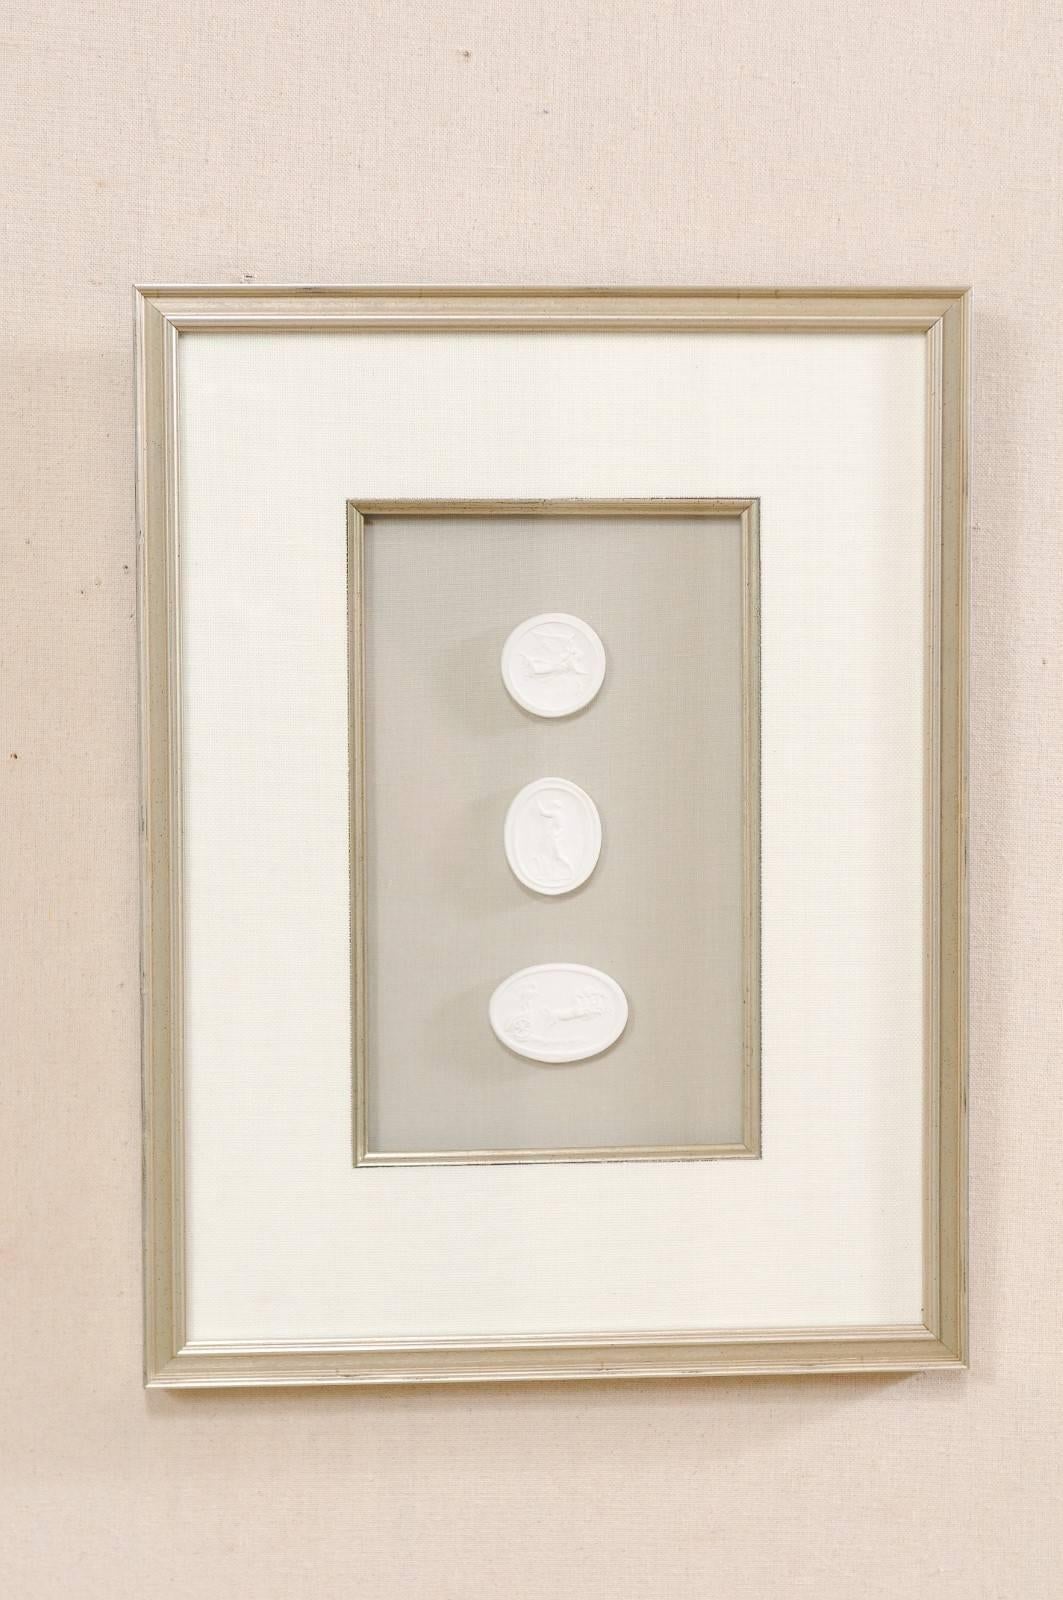 Greco Roman Set of Four Wall Decorations of Hand-Cast White Intaglios in Silver Leaf Frames